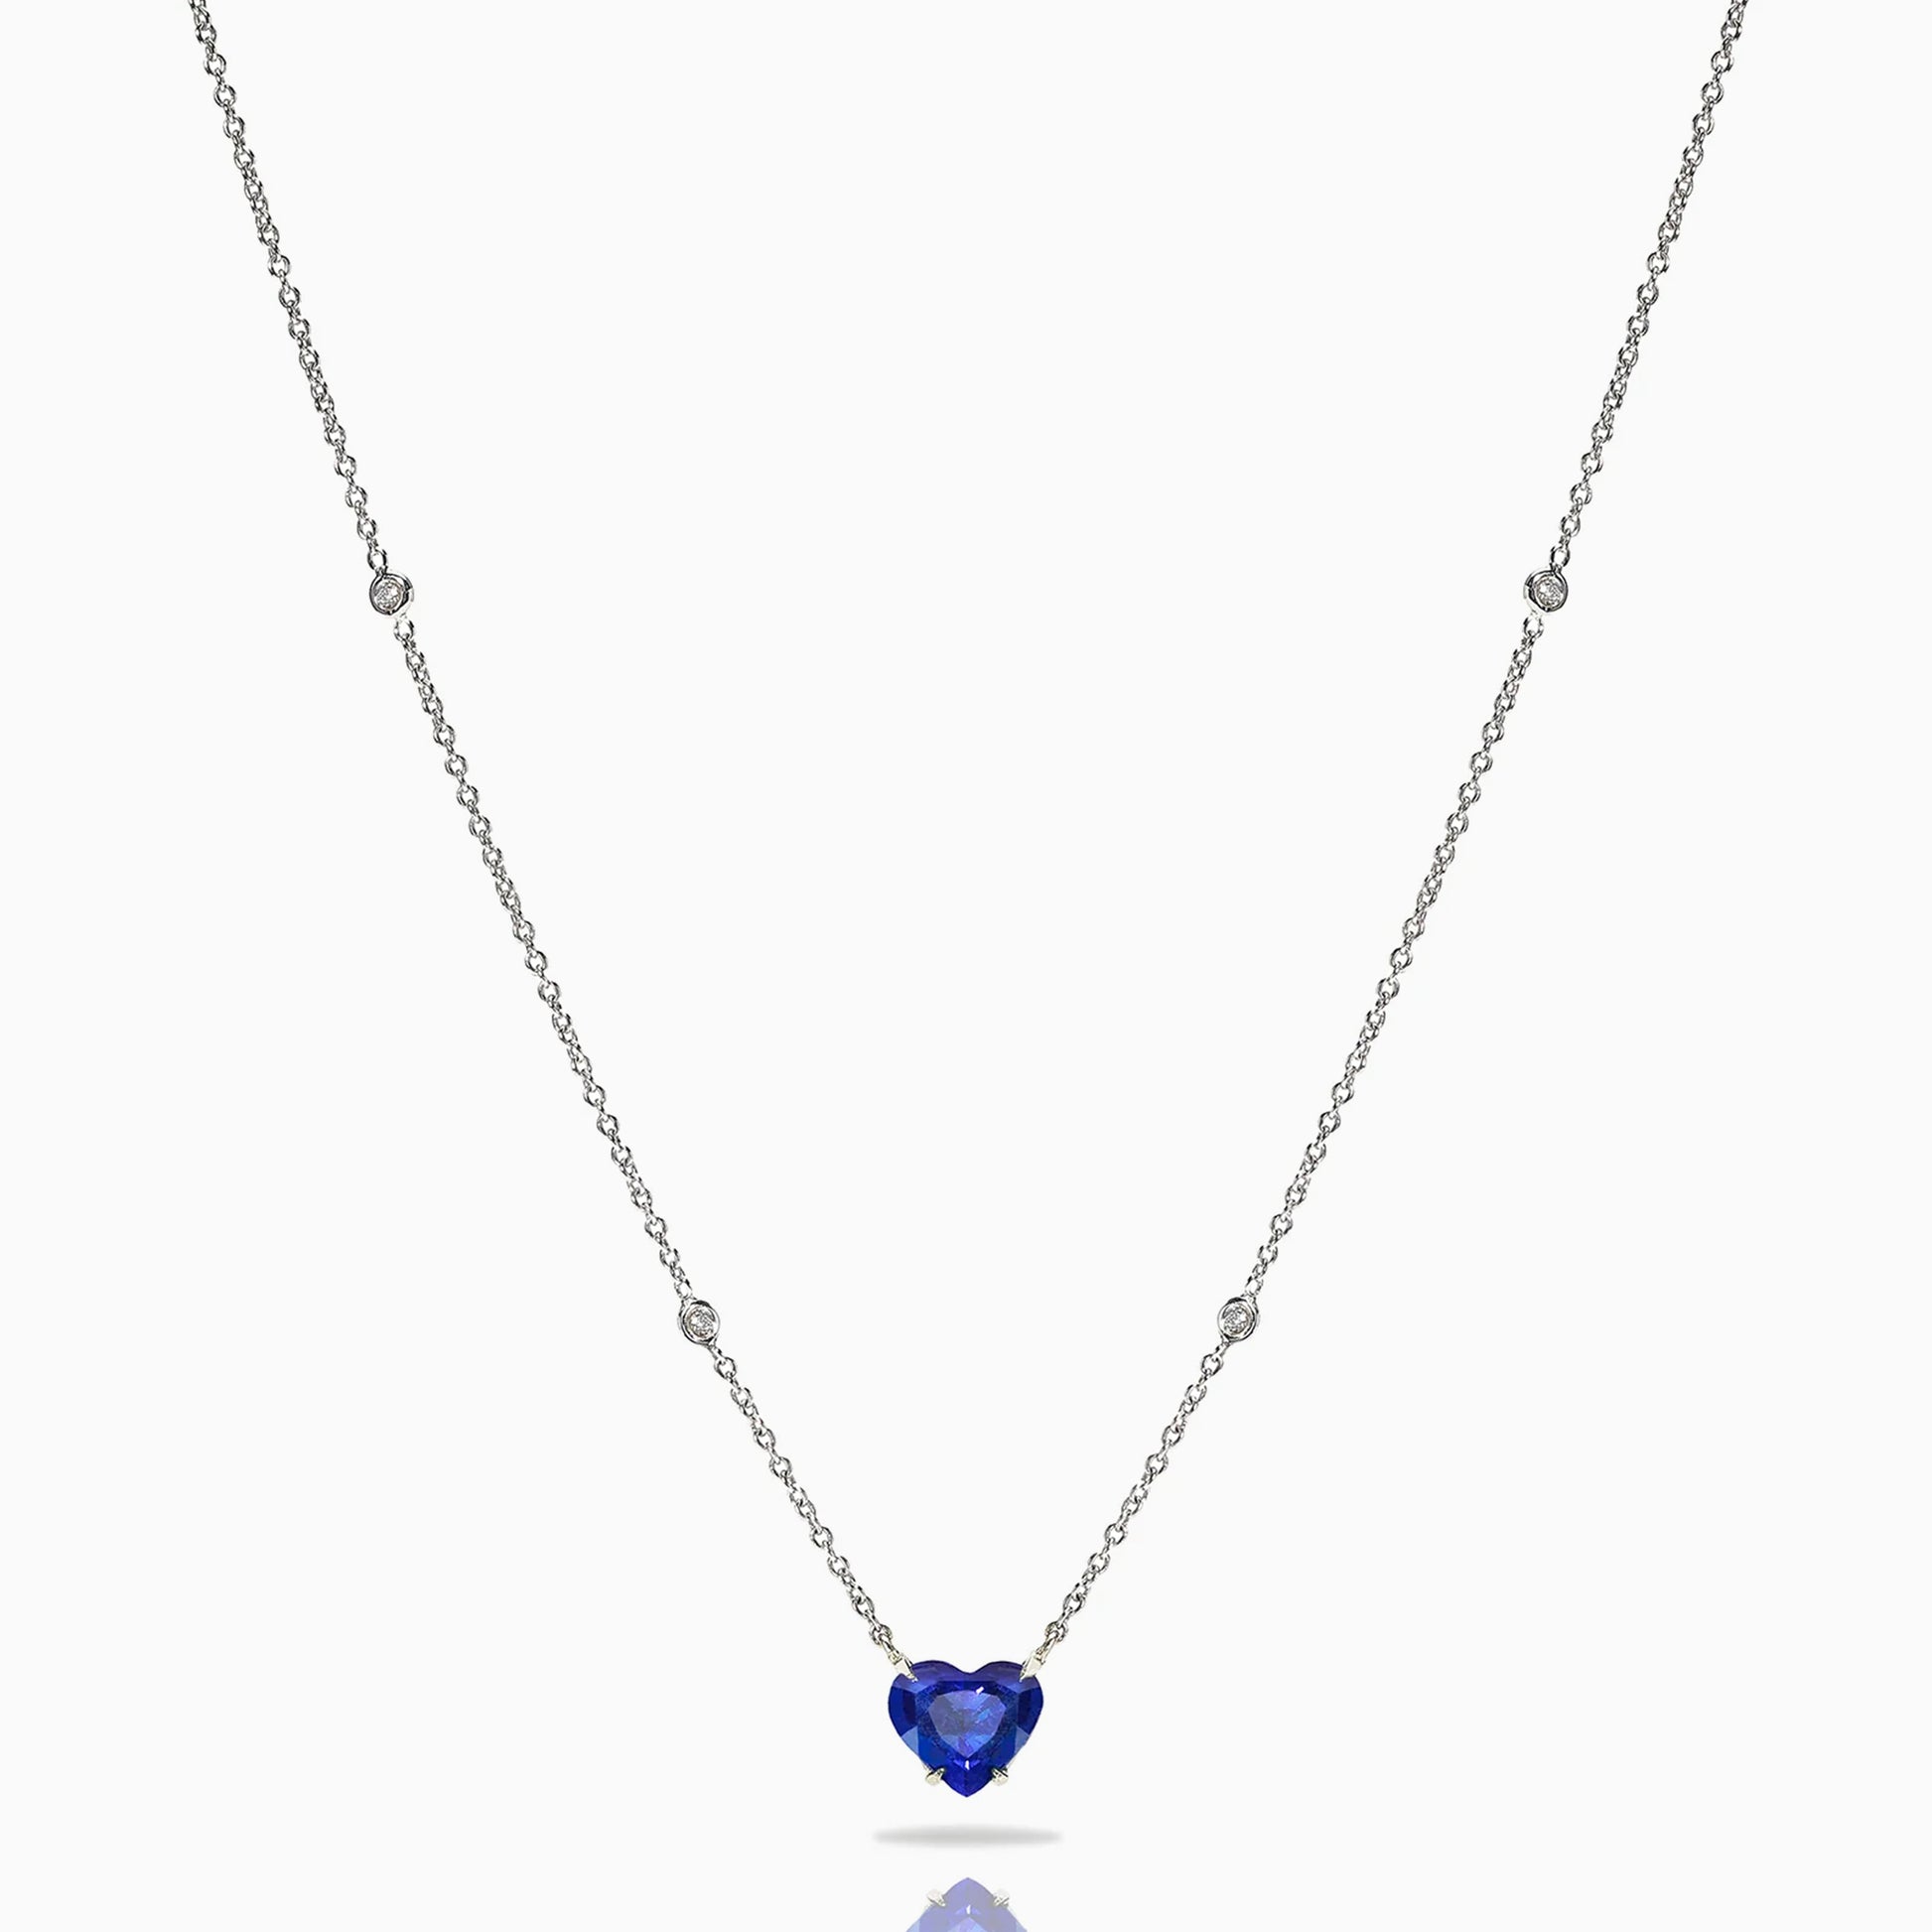 Heart Shape Sapphire Necklace on a white background